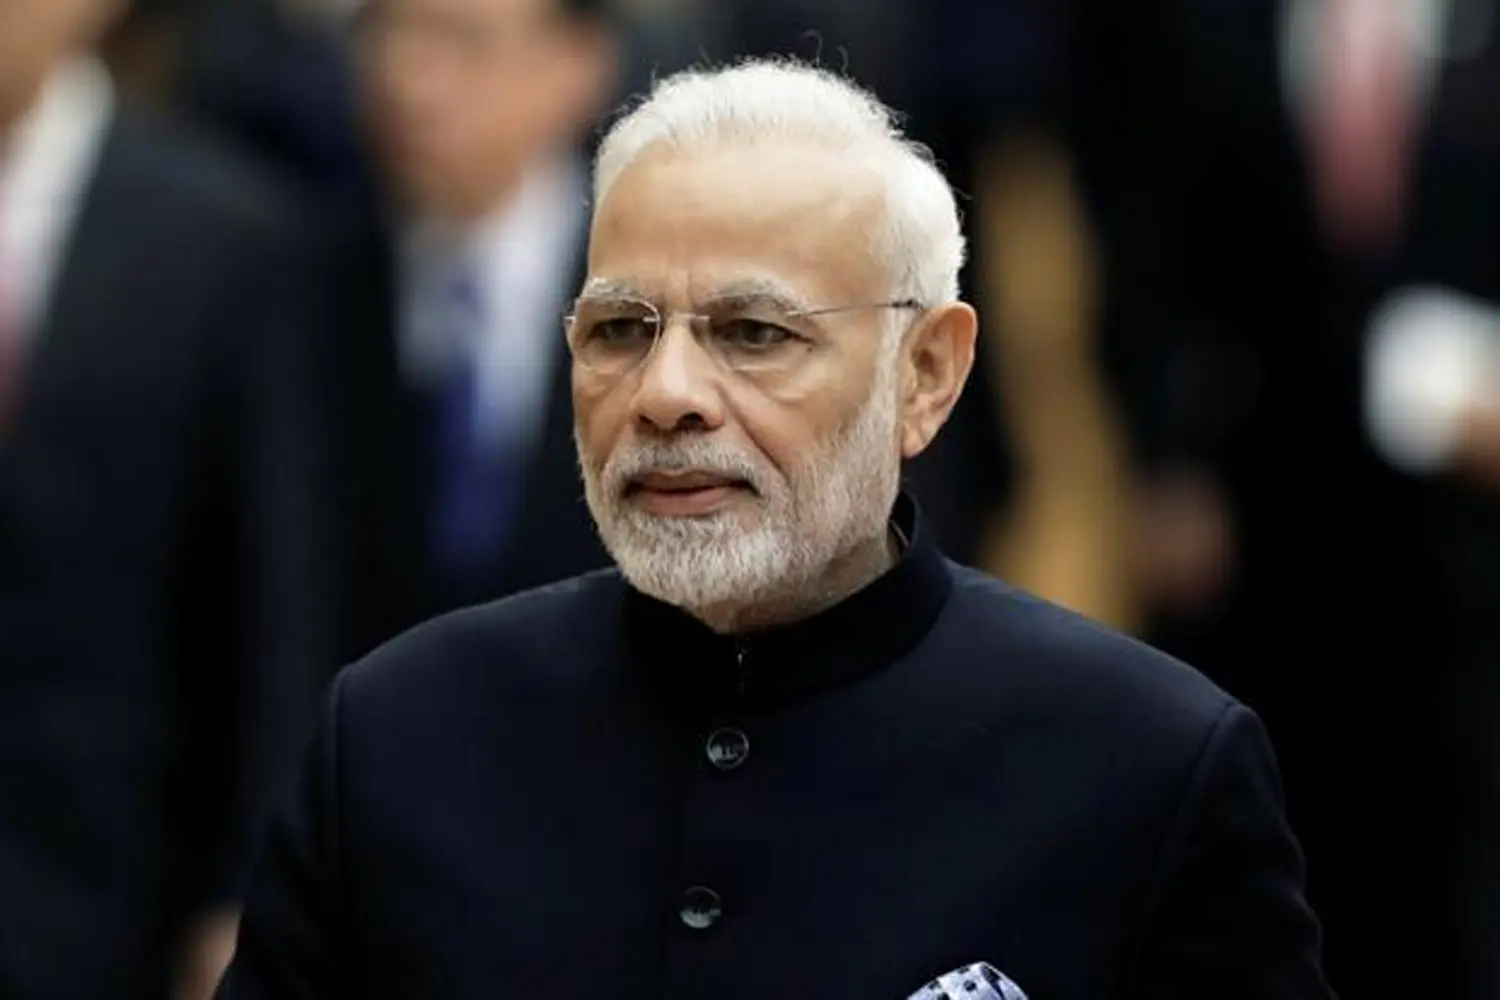 PM Resignation Modi To Stay In Office Awaiting New Govt